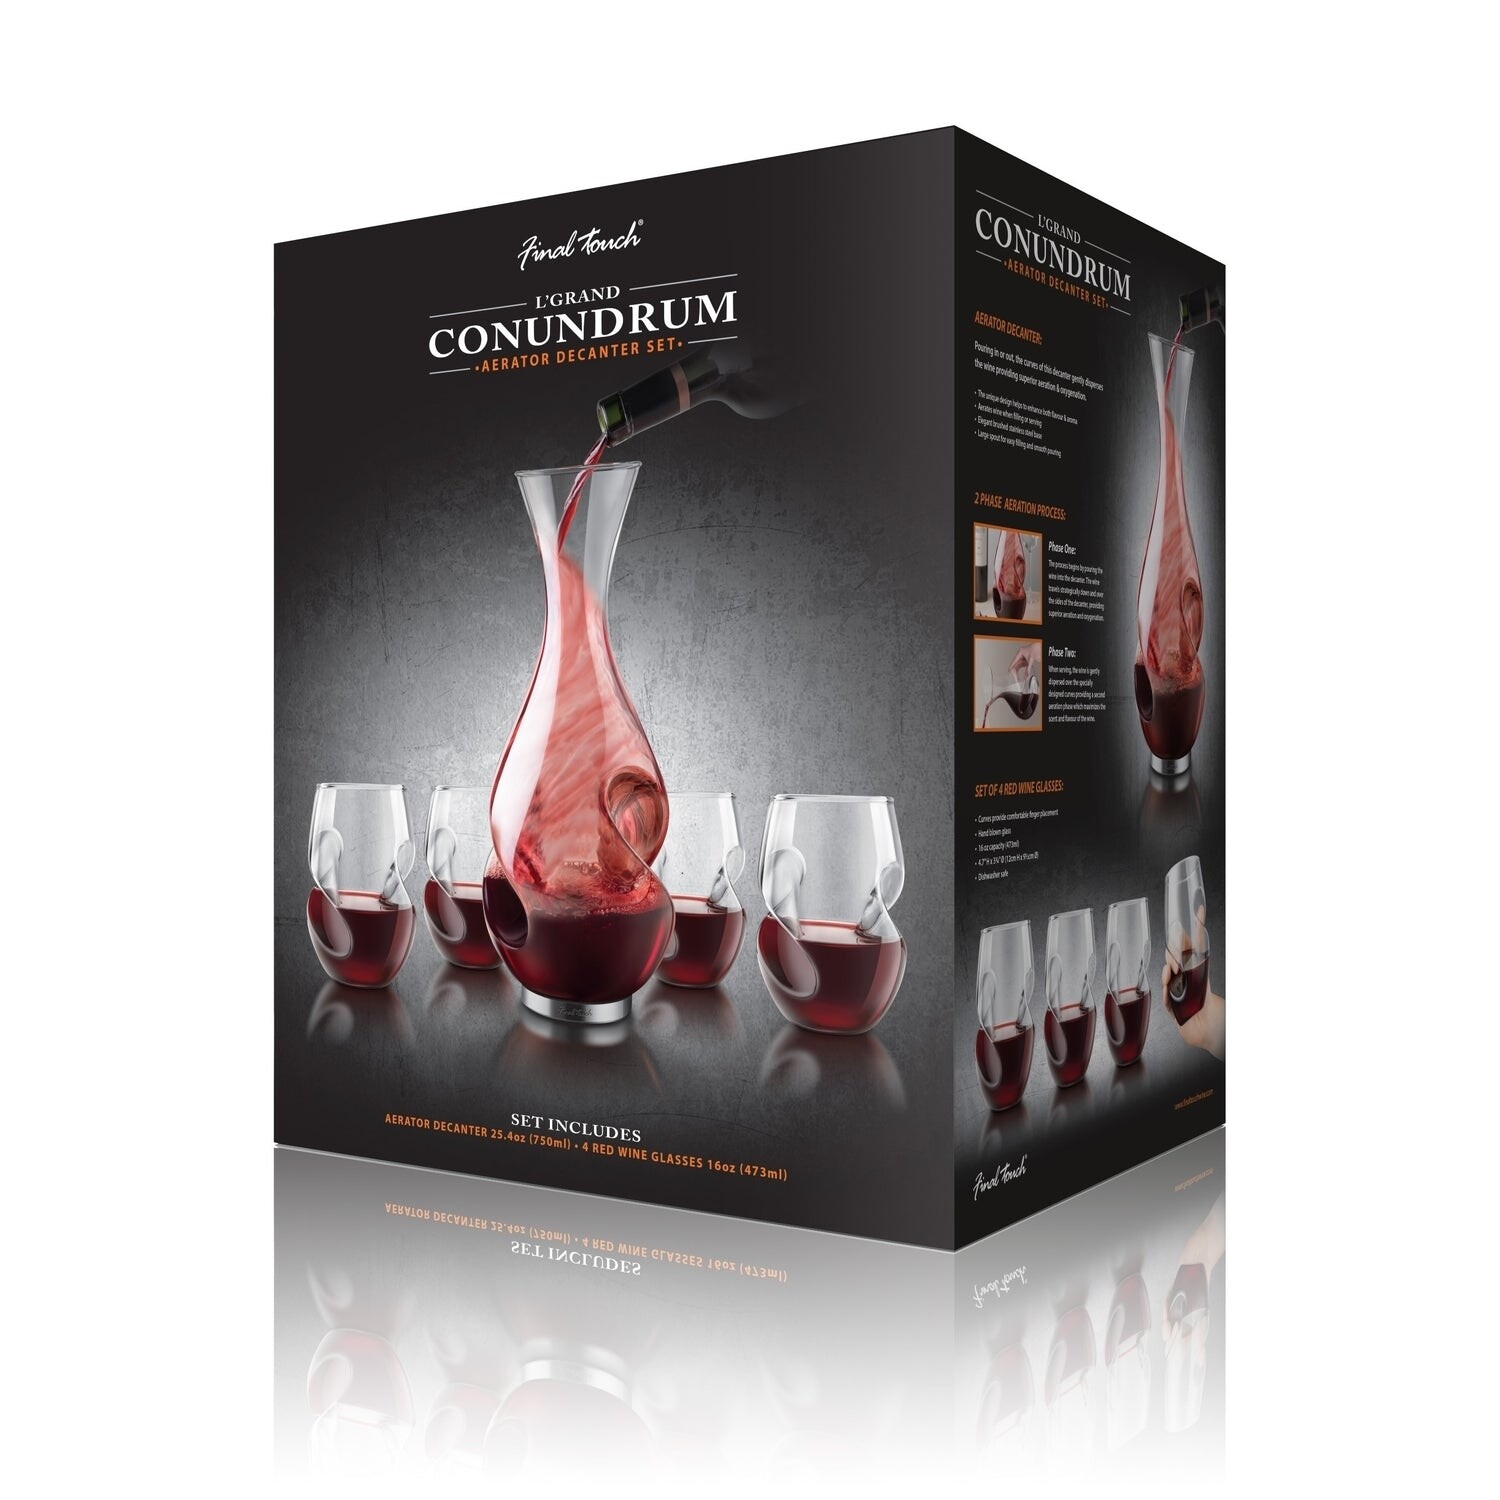 Final Touch | L'Grand Conundrum Aerator Decanter Red Wine Set